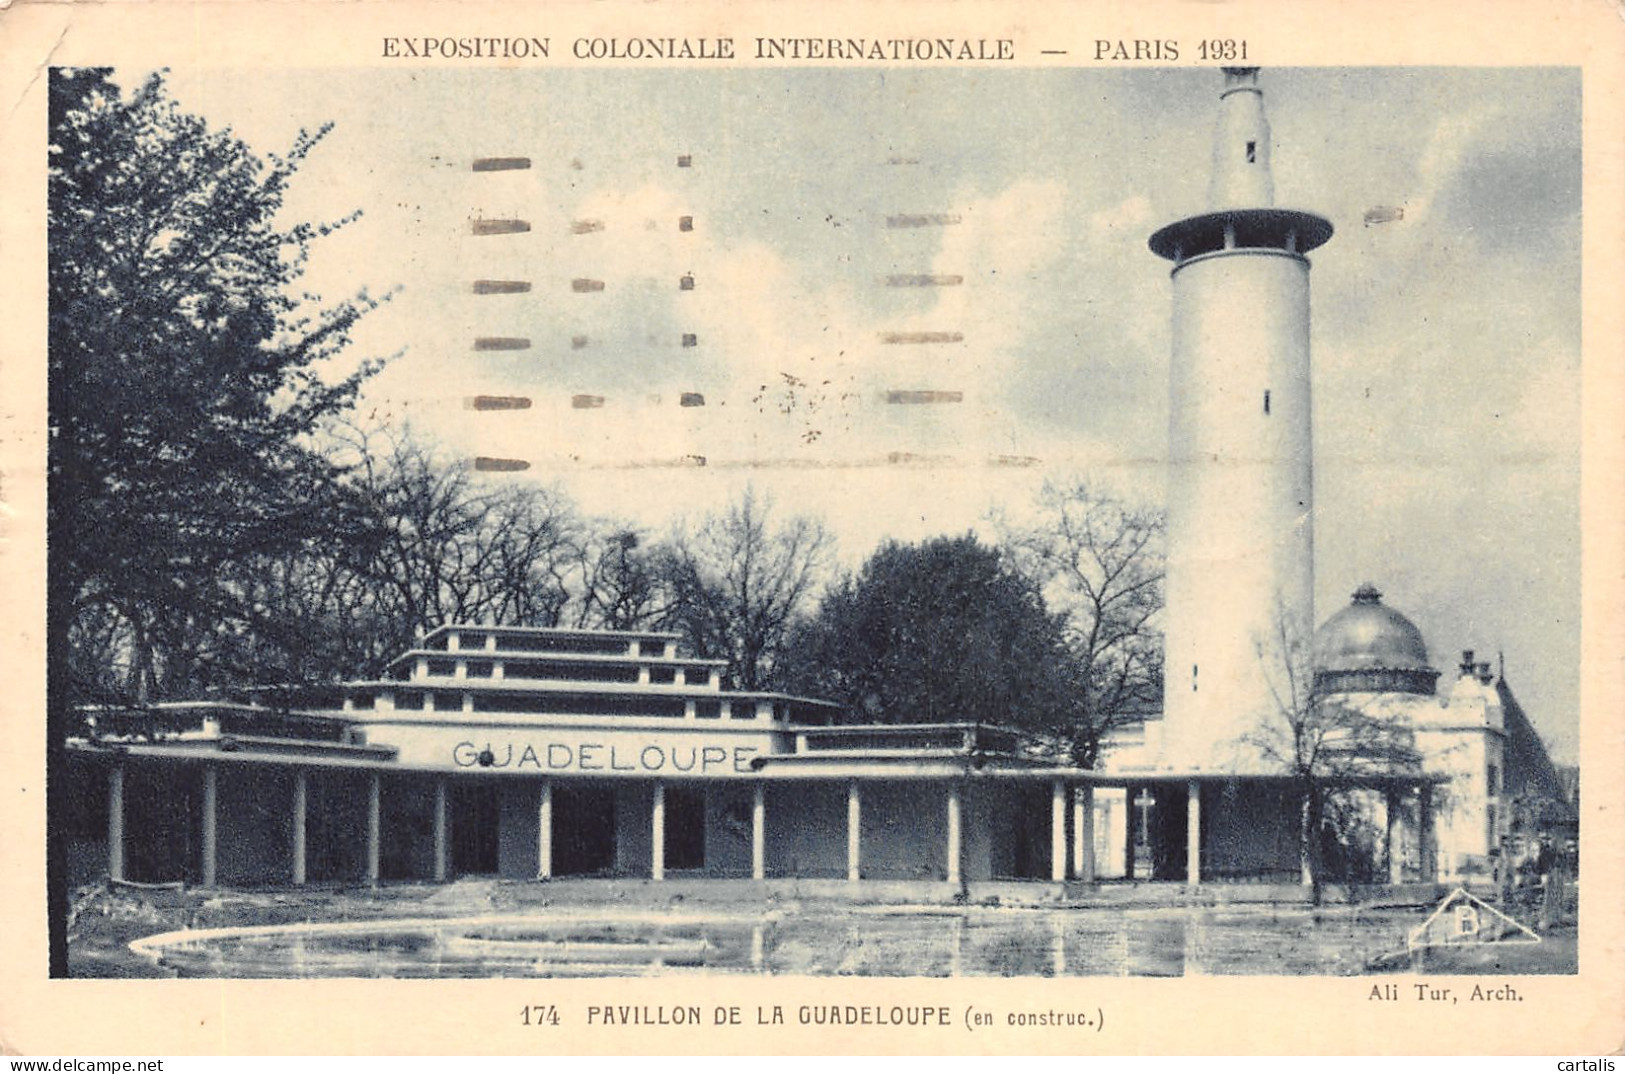 75-PARIS EXPO COLONIALE INTERNATIONALE GUADELOUPE-N°4228-C/0199 - Expositions